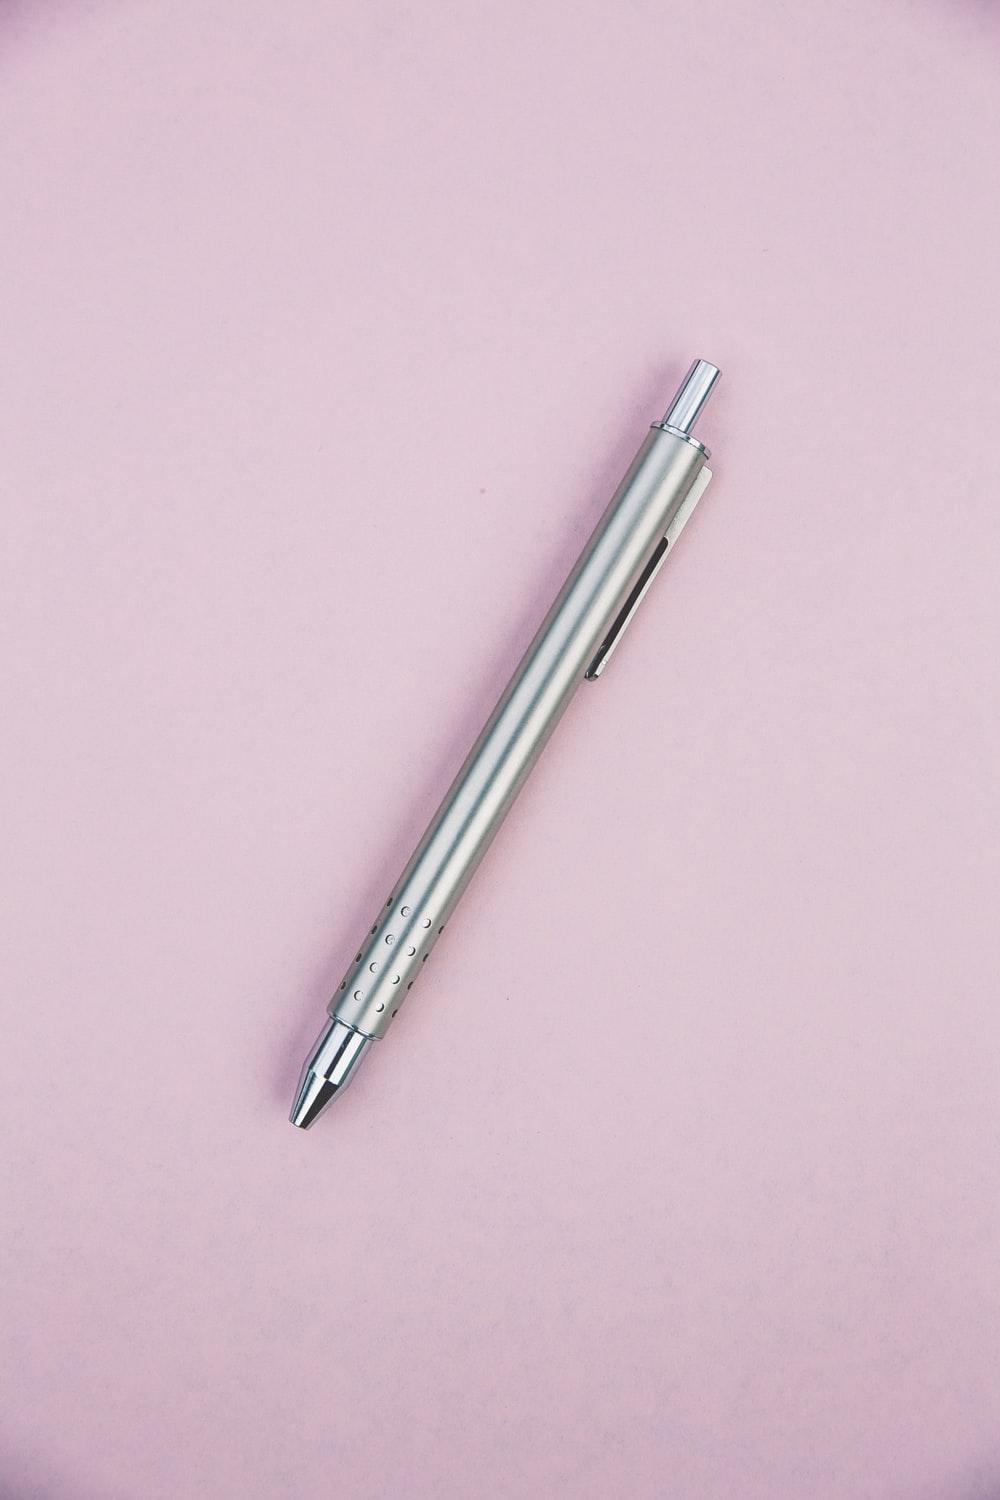 Pen Picture. Download Free Image